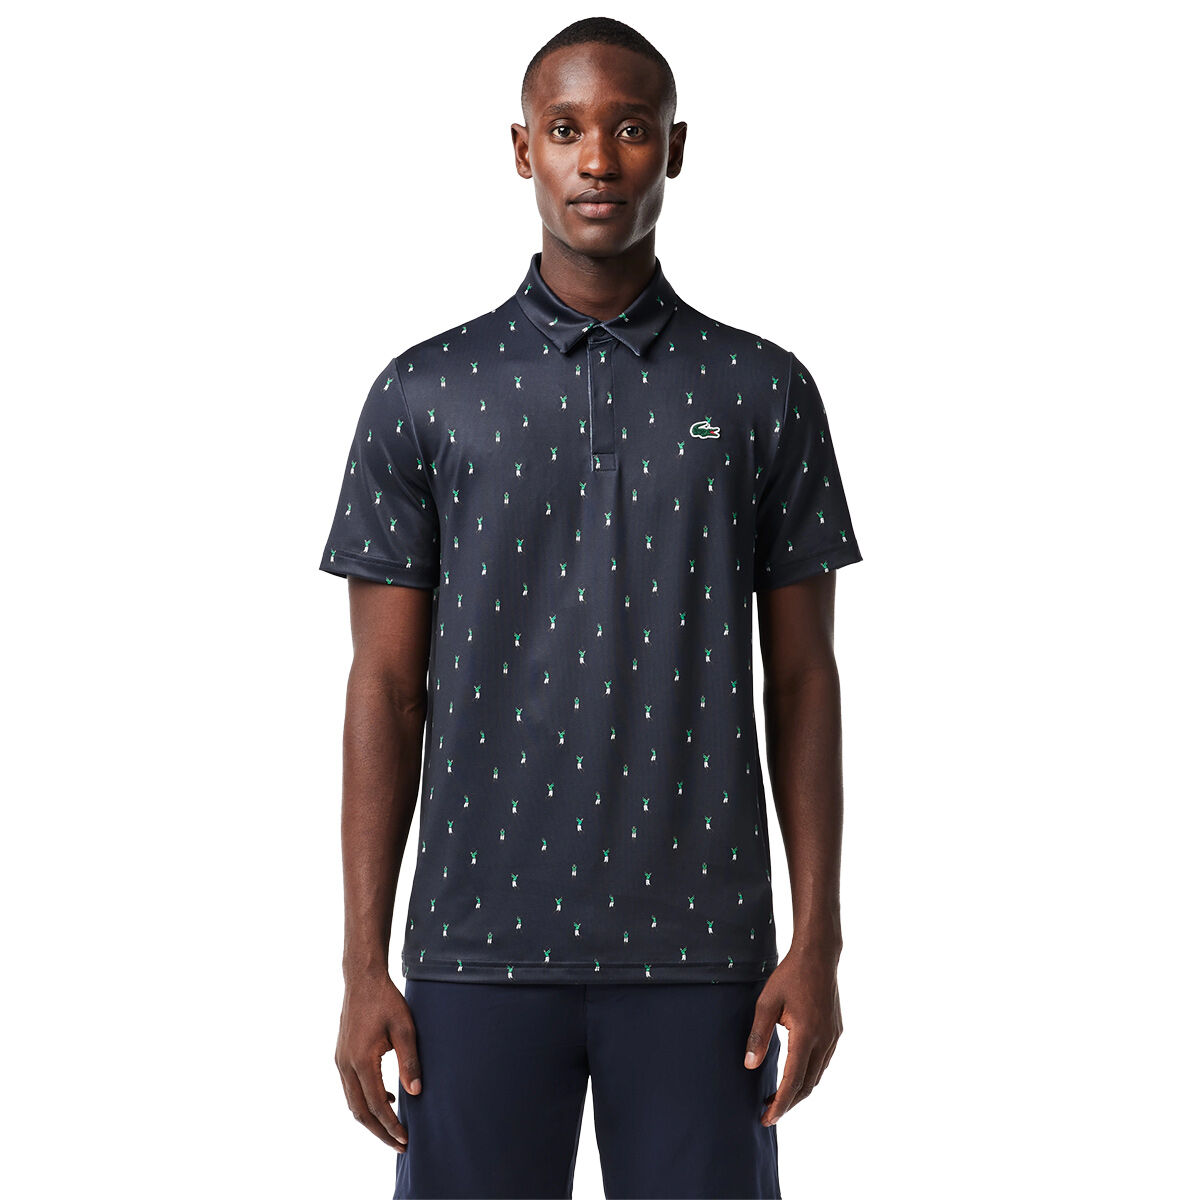 Lacoste Men's All-Over Print Golf Polo Shirt, Mens, Navy blue, Small | American Golf von Lacoste